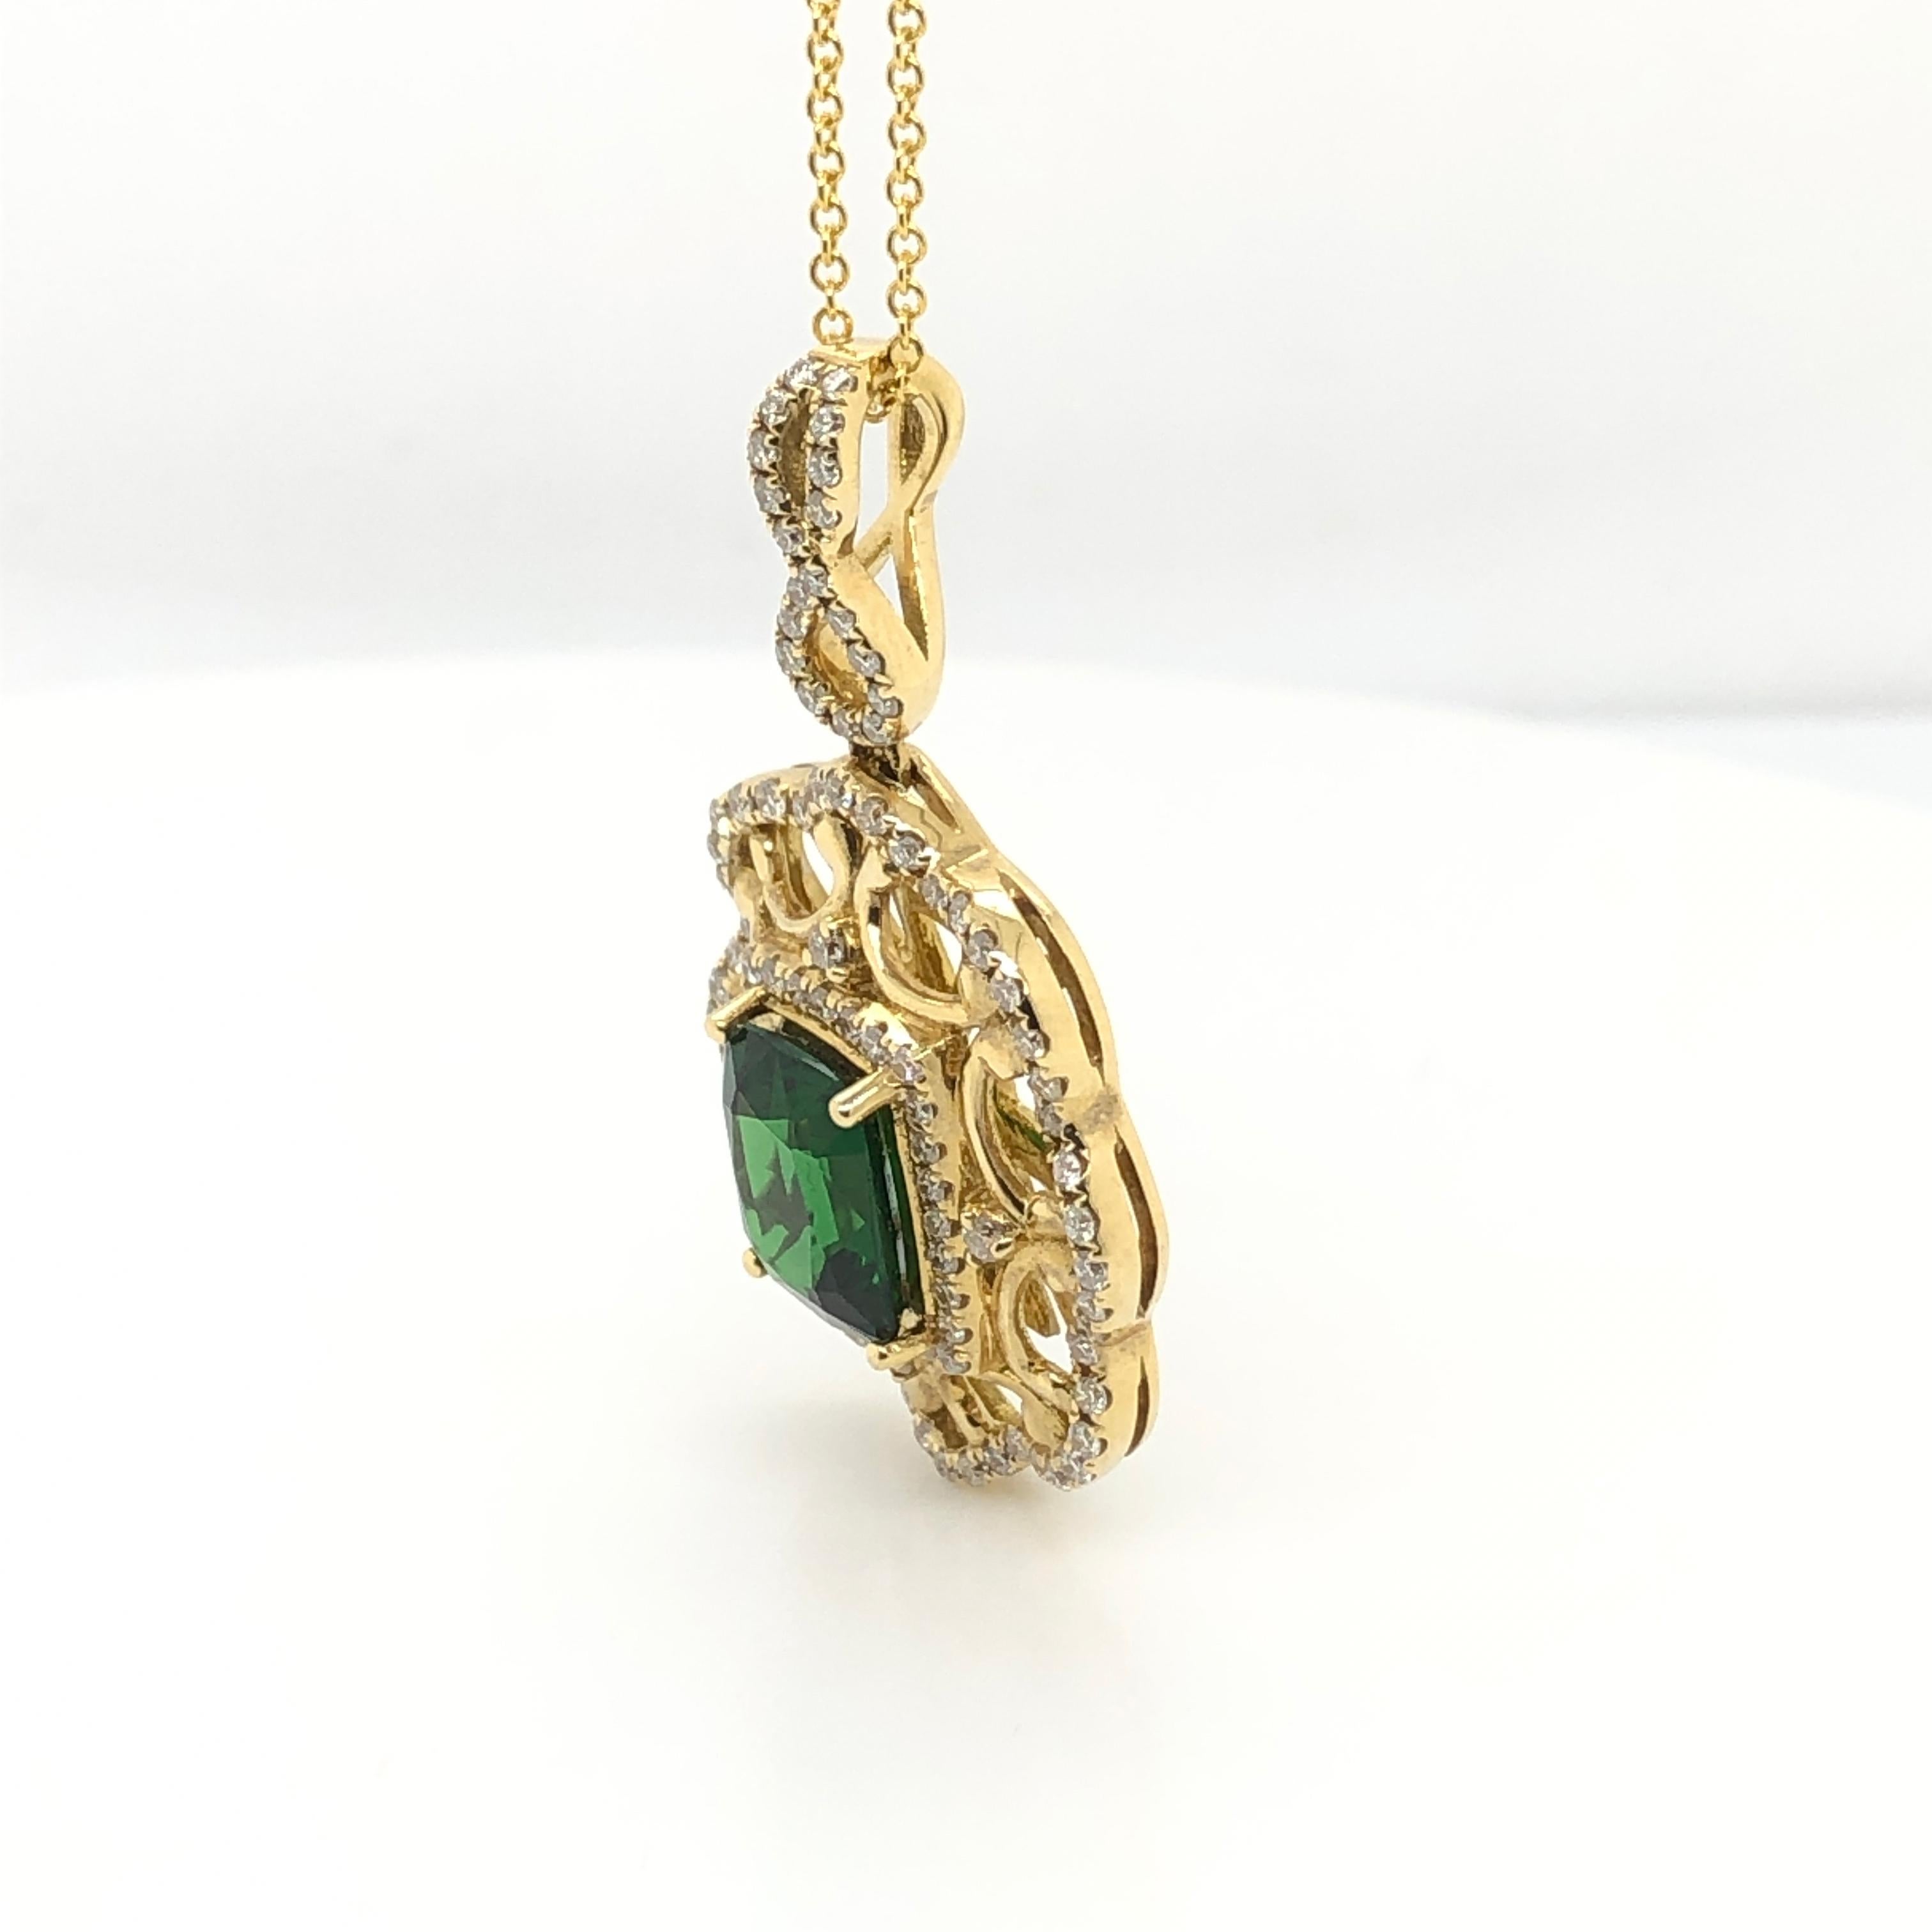 Fresh and lively best describes this 18k yellow gold pendant from Le Vian Couture centered with a 2-carat cushion cut Tsavorite nestled within a halo of Vanilla Diamonds in an elaborate scallop edged setting accented with Vanilla Diamonds, 1/2 ct